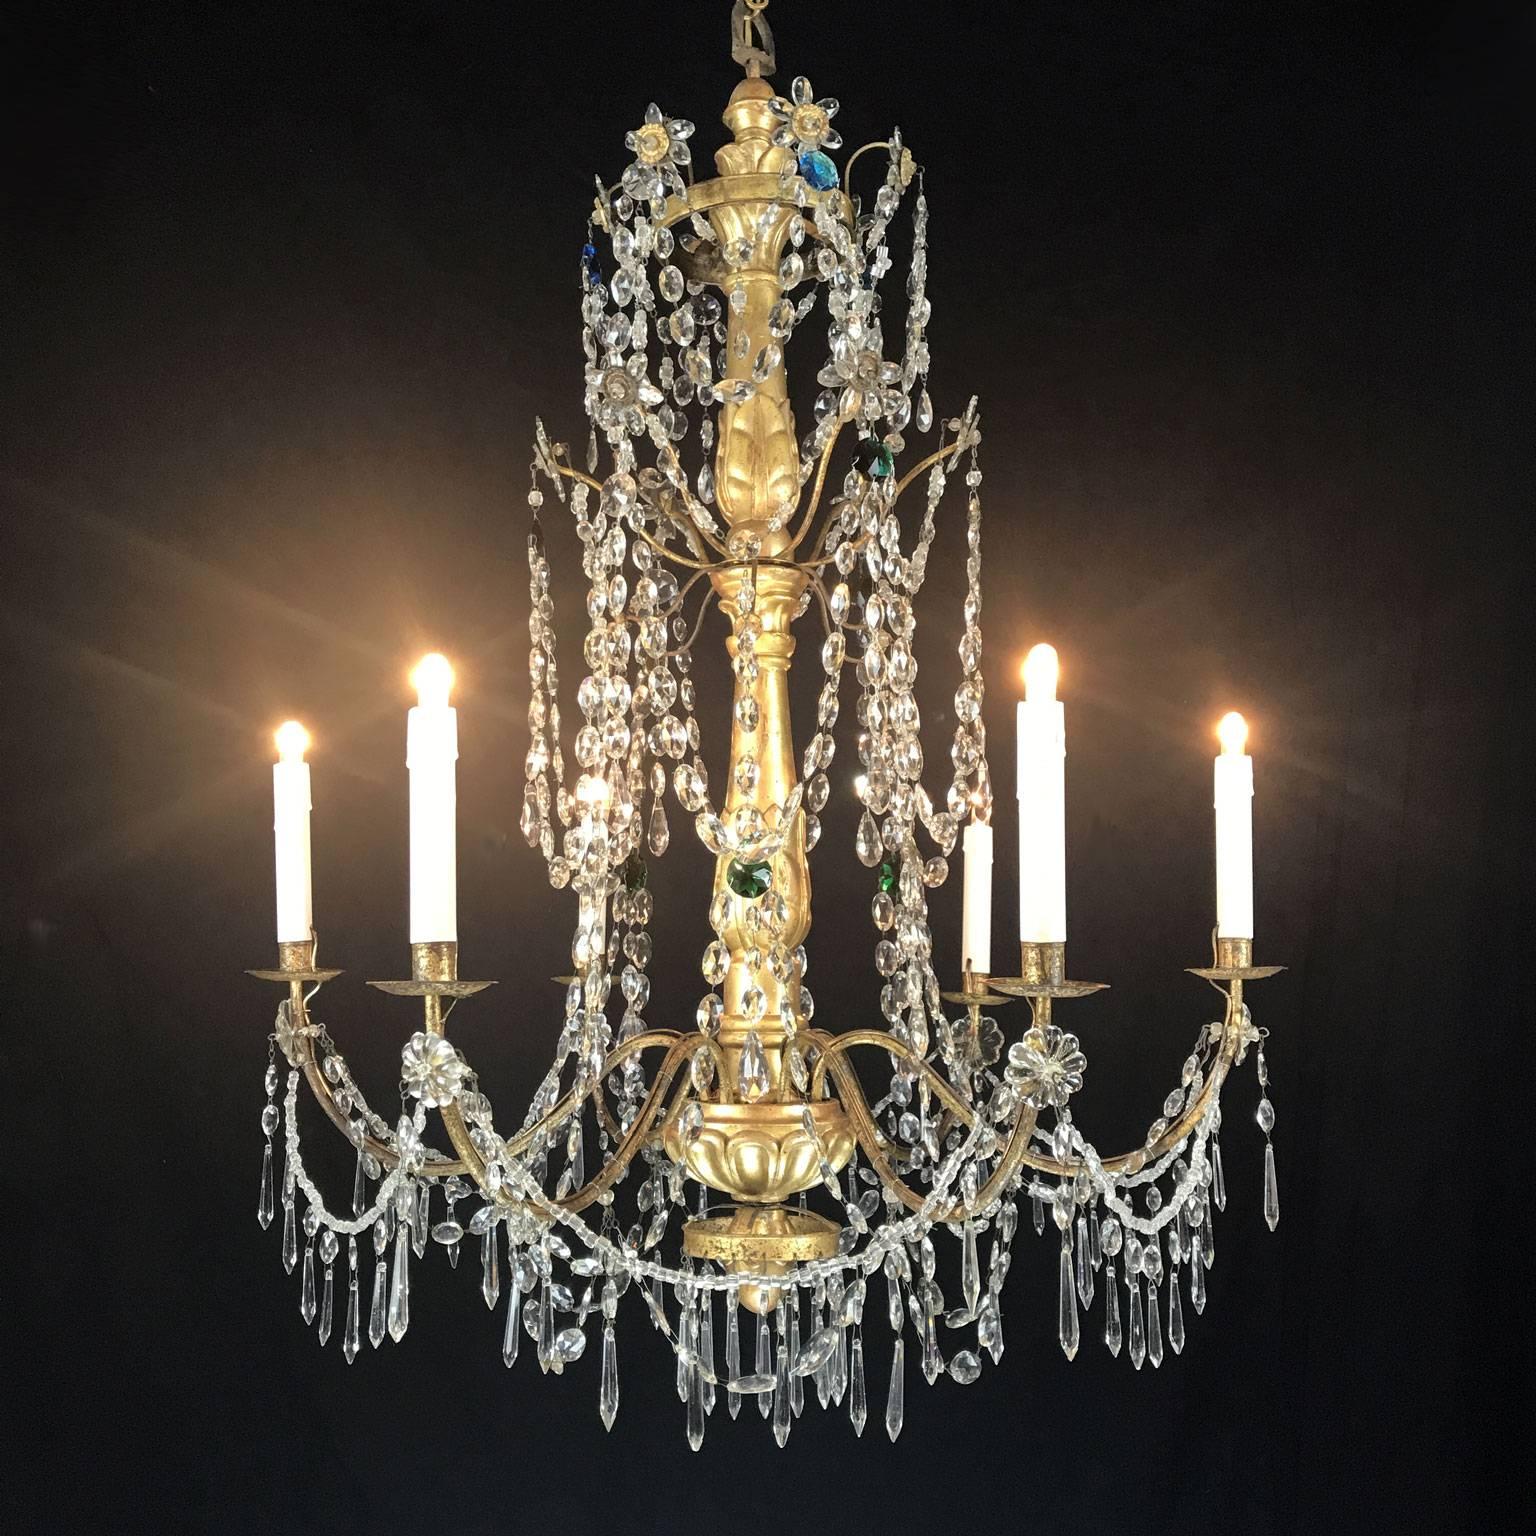 Late 18th century Genoese Empire crystal chandelier with a giltwood carved stem, featuring six curved candle arms draped with cut crystal beads and pendants and is decorated with a few blue and green crystals and original gilded and repoussé brass